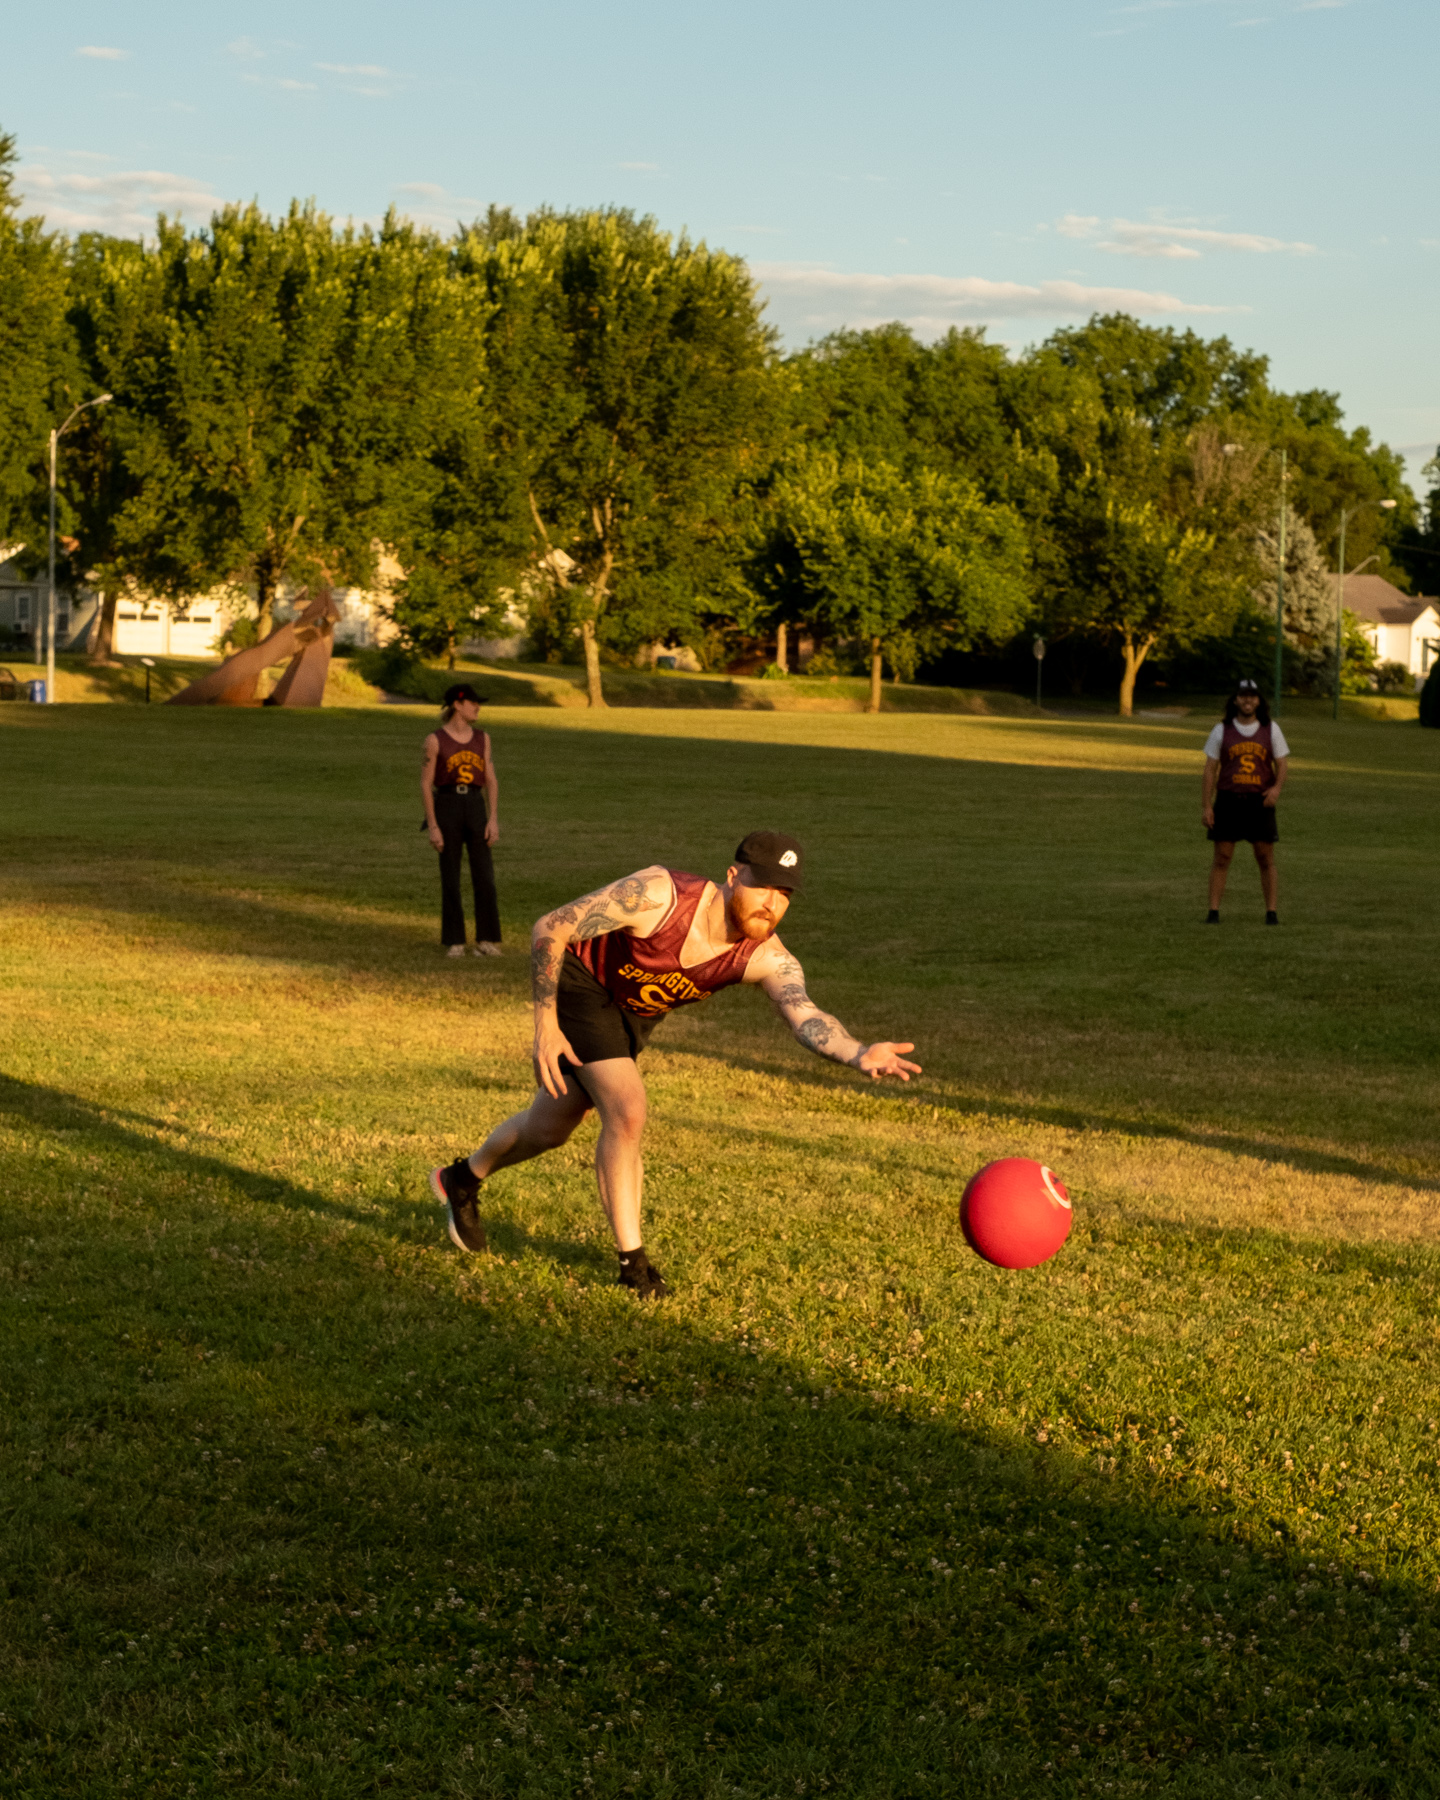 A player rolls a red rubber ball during a game of kickball